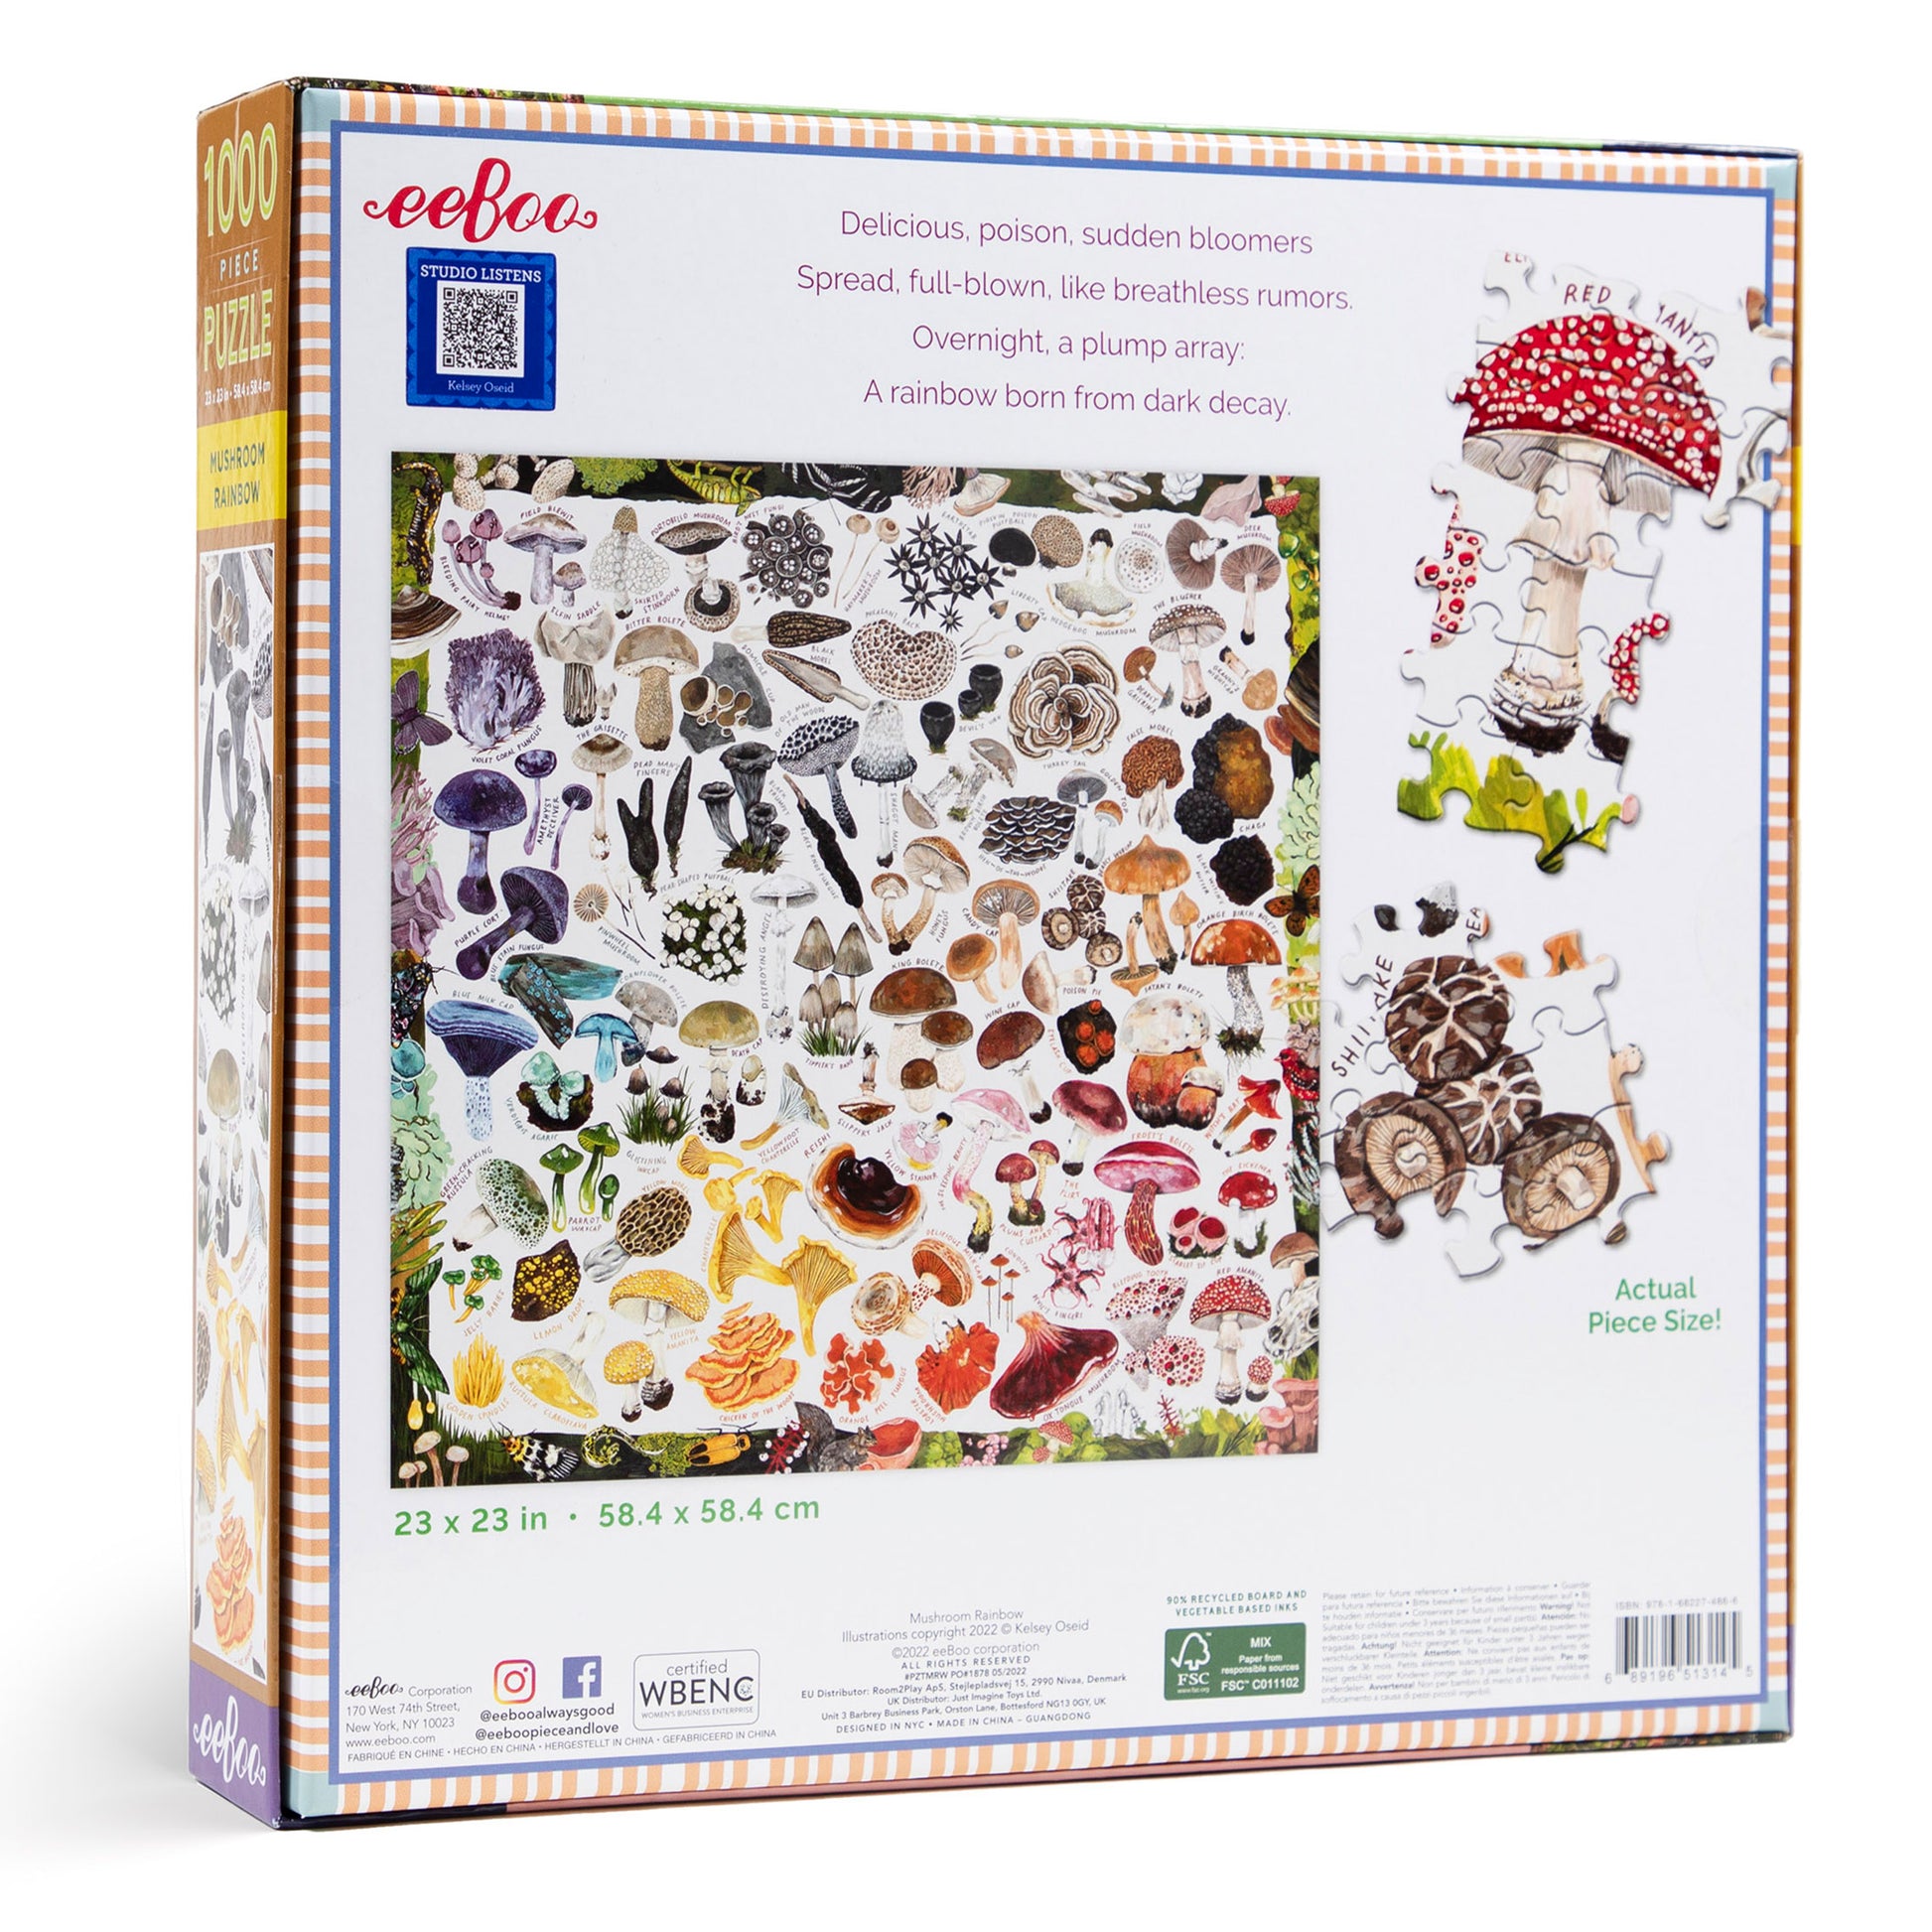 Mushroom Rainbow 1000 Piece Square Jigsaw Puzzle eeBoo | Gifts for Forest Foragers and Fungi Lovers